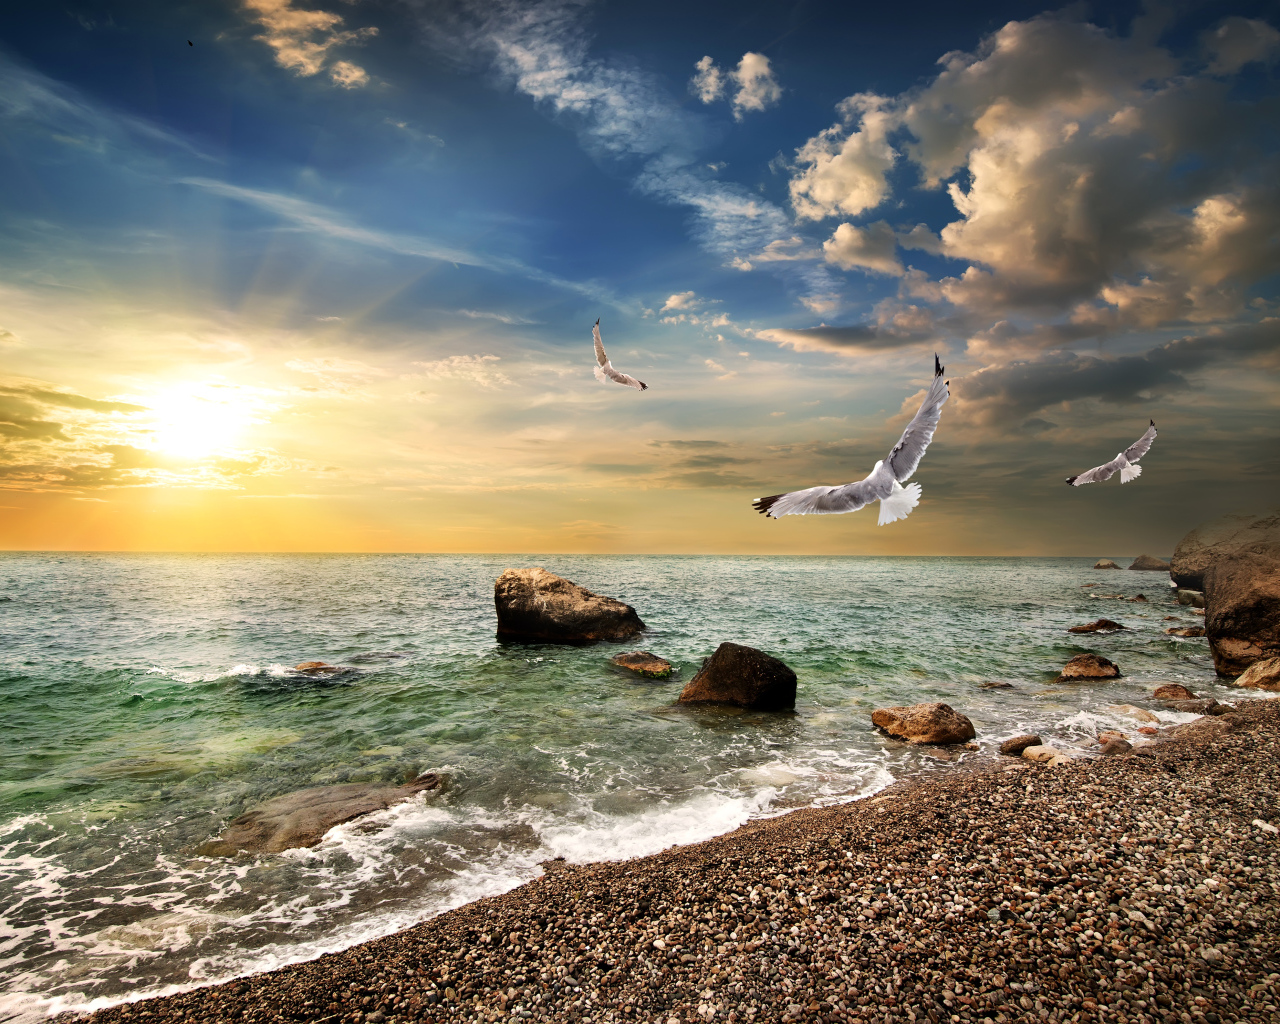 Seagulls fly over the seashore at sunset